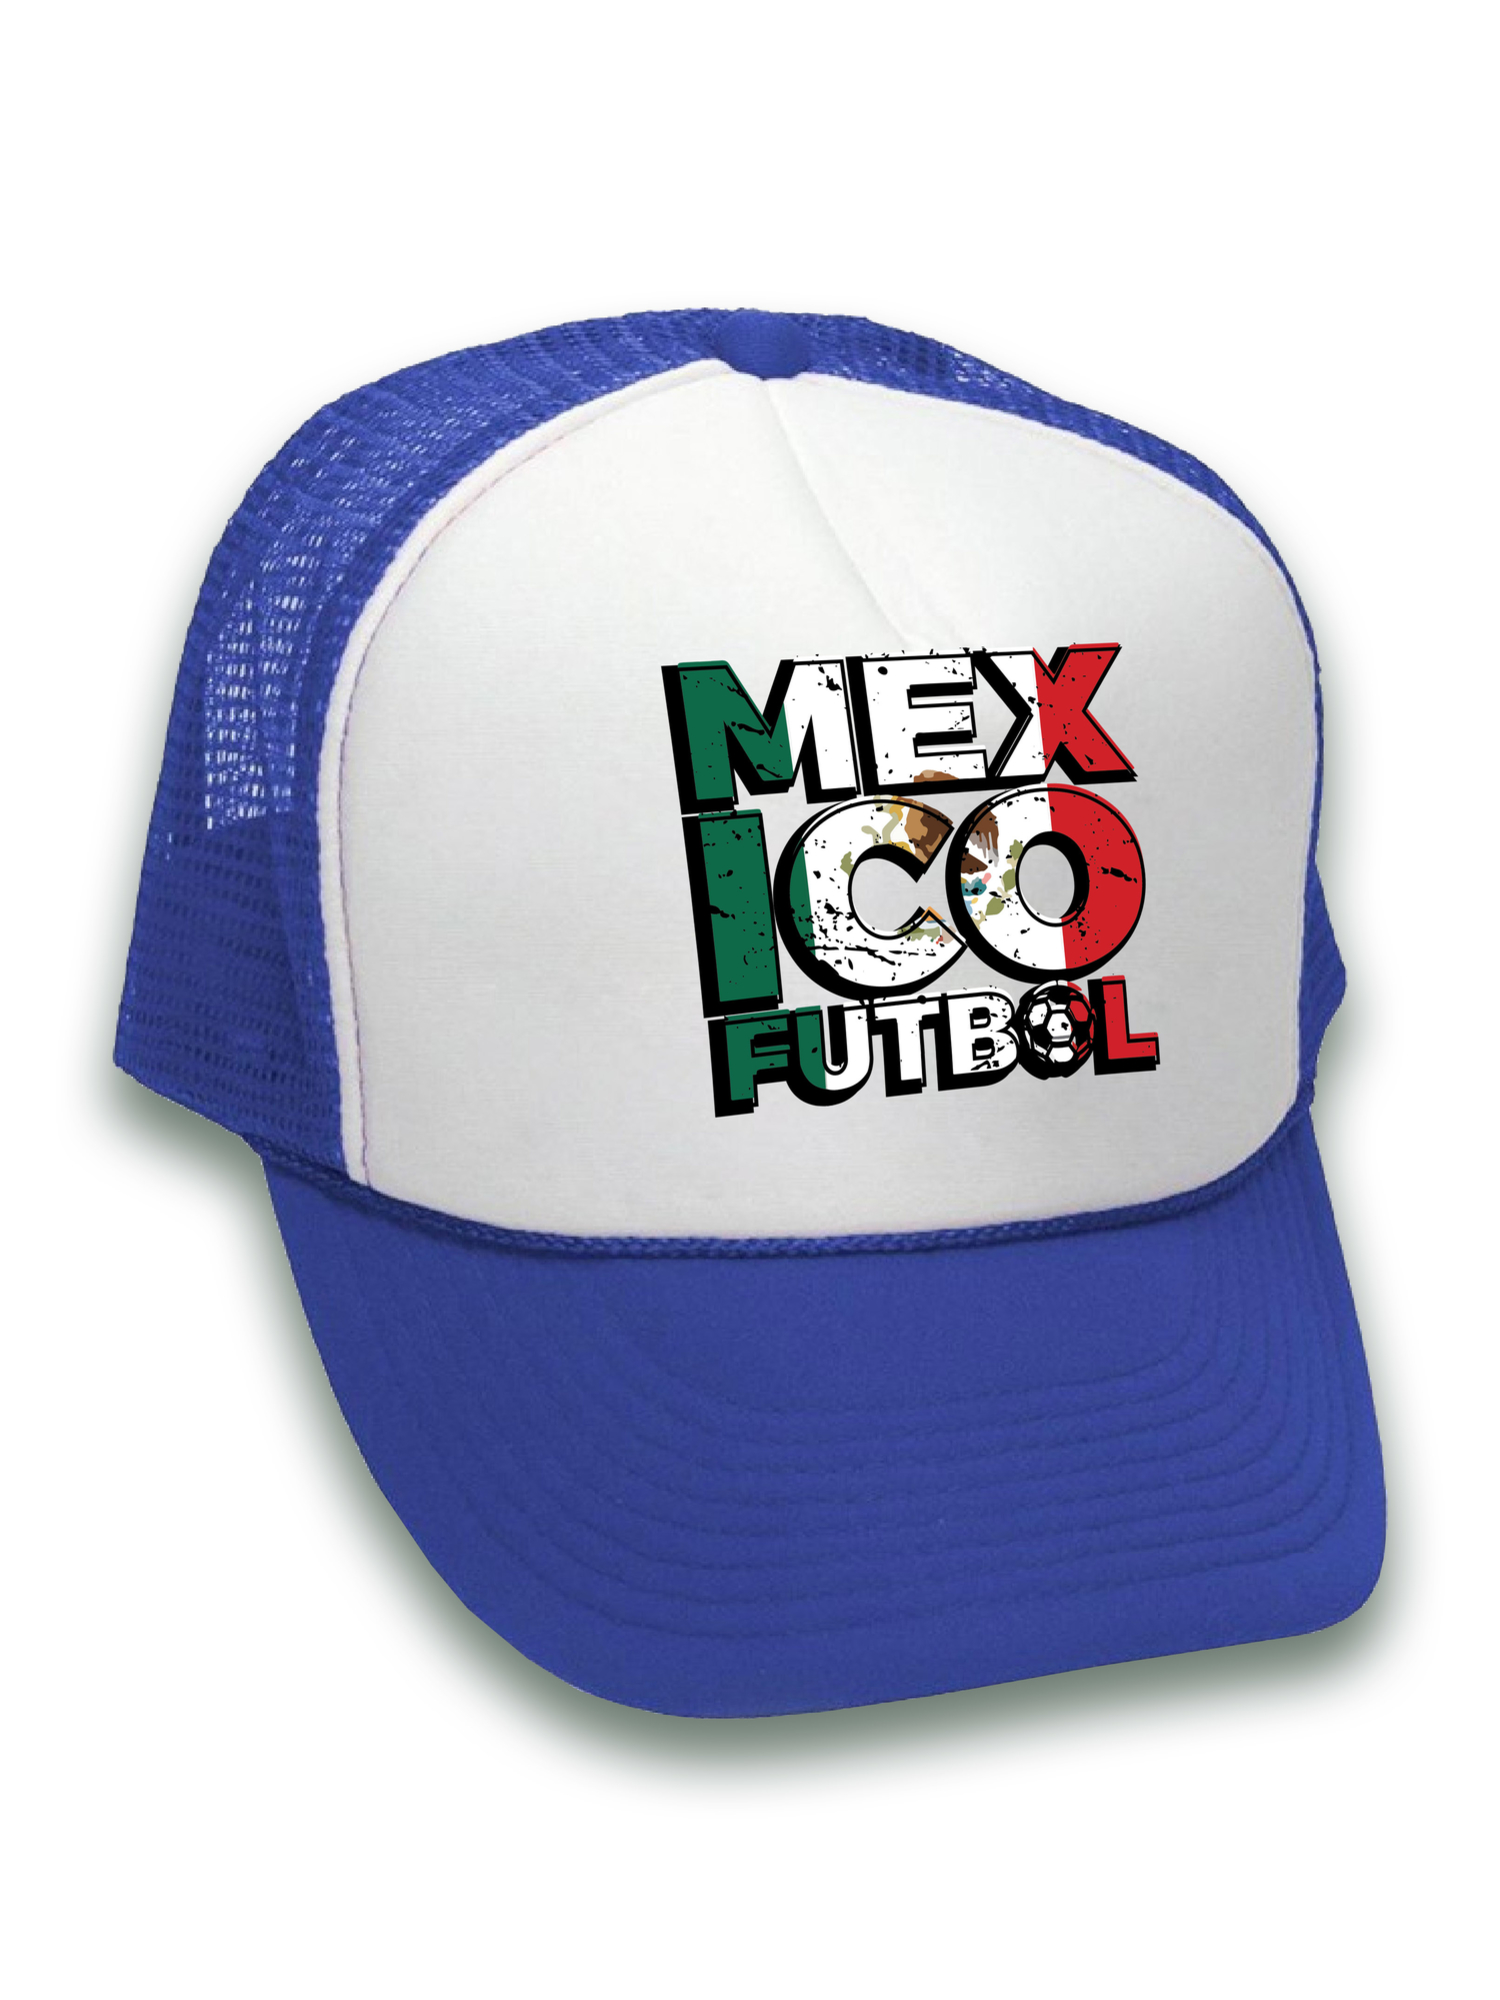 Awkward Styles Mexico Futbol Hat Mexico Trucker Hats for Men and Women Hat Gifts from Mexico Mexican Soccer Cap Mexican Hats Unisex Mexico Snapback Hat Mexico 2018 Trucker Hats Mexico Football Hat - image 2 of 6